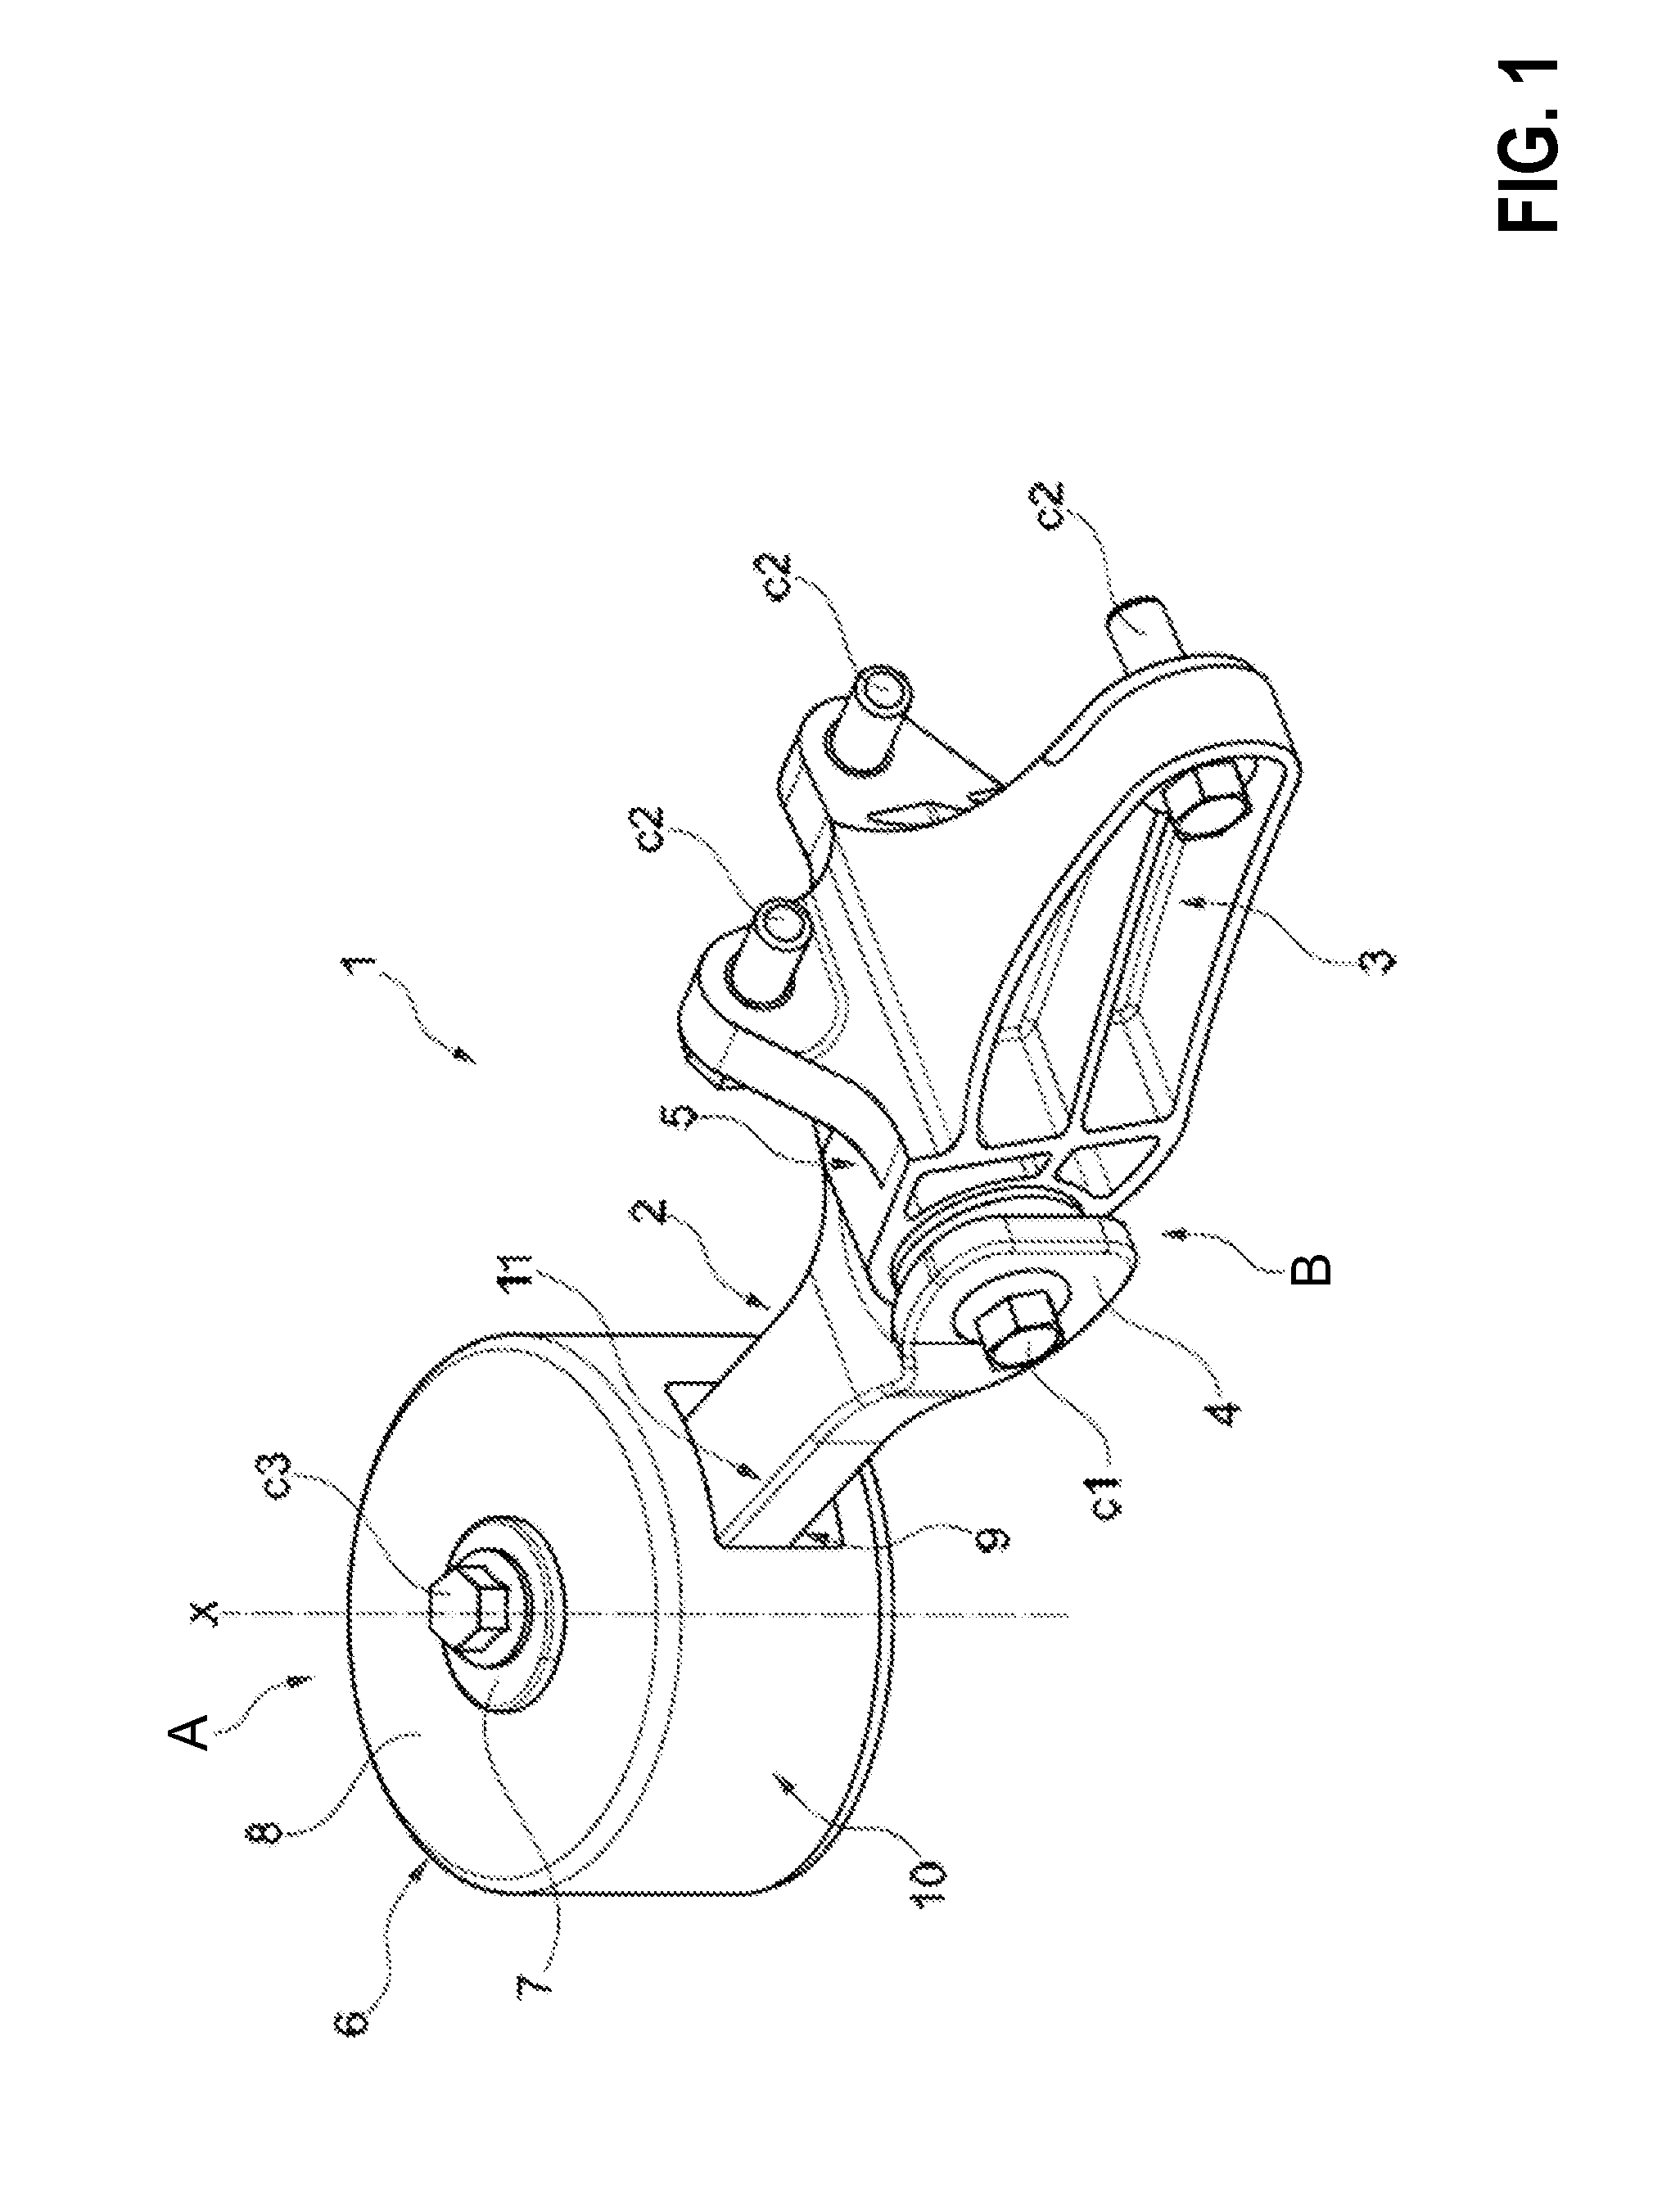 System for reducing engine roll